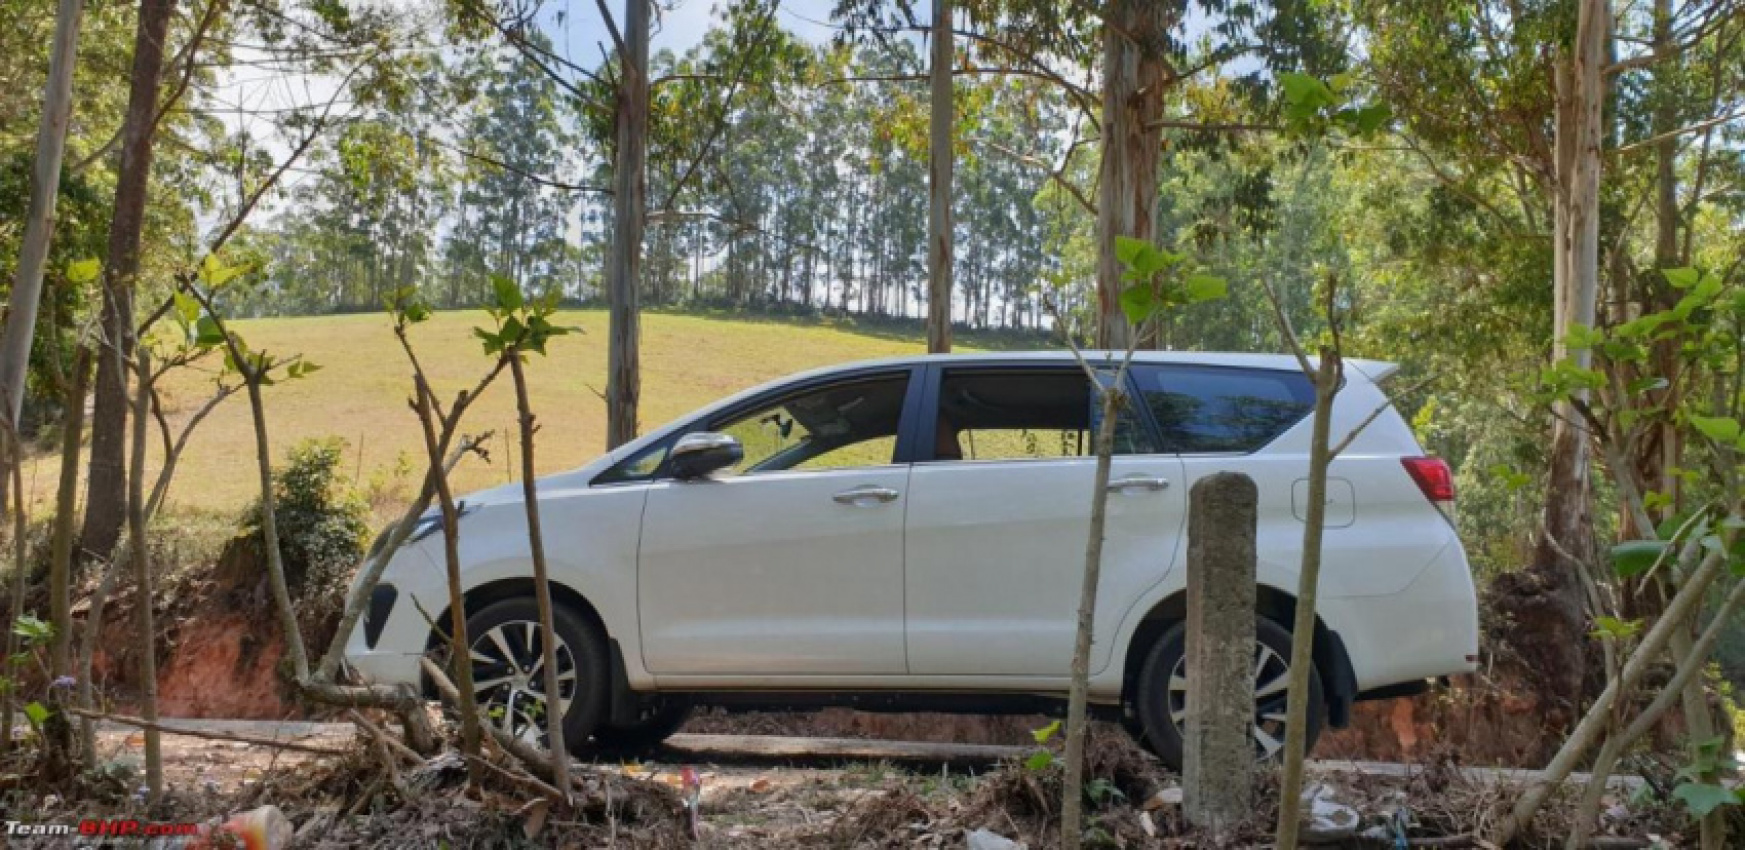 autos, cars, toyota, android, car ownership, indian, innova crysta, member content, observations, toyota innova, android, new toyota innova crysta: observations after a 400 km drive